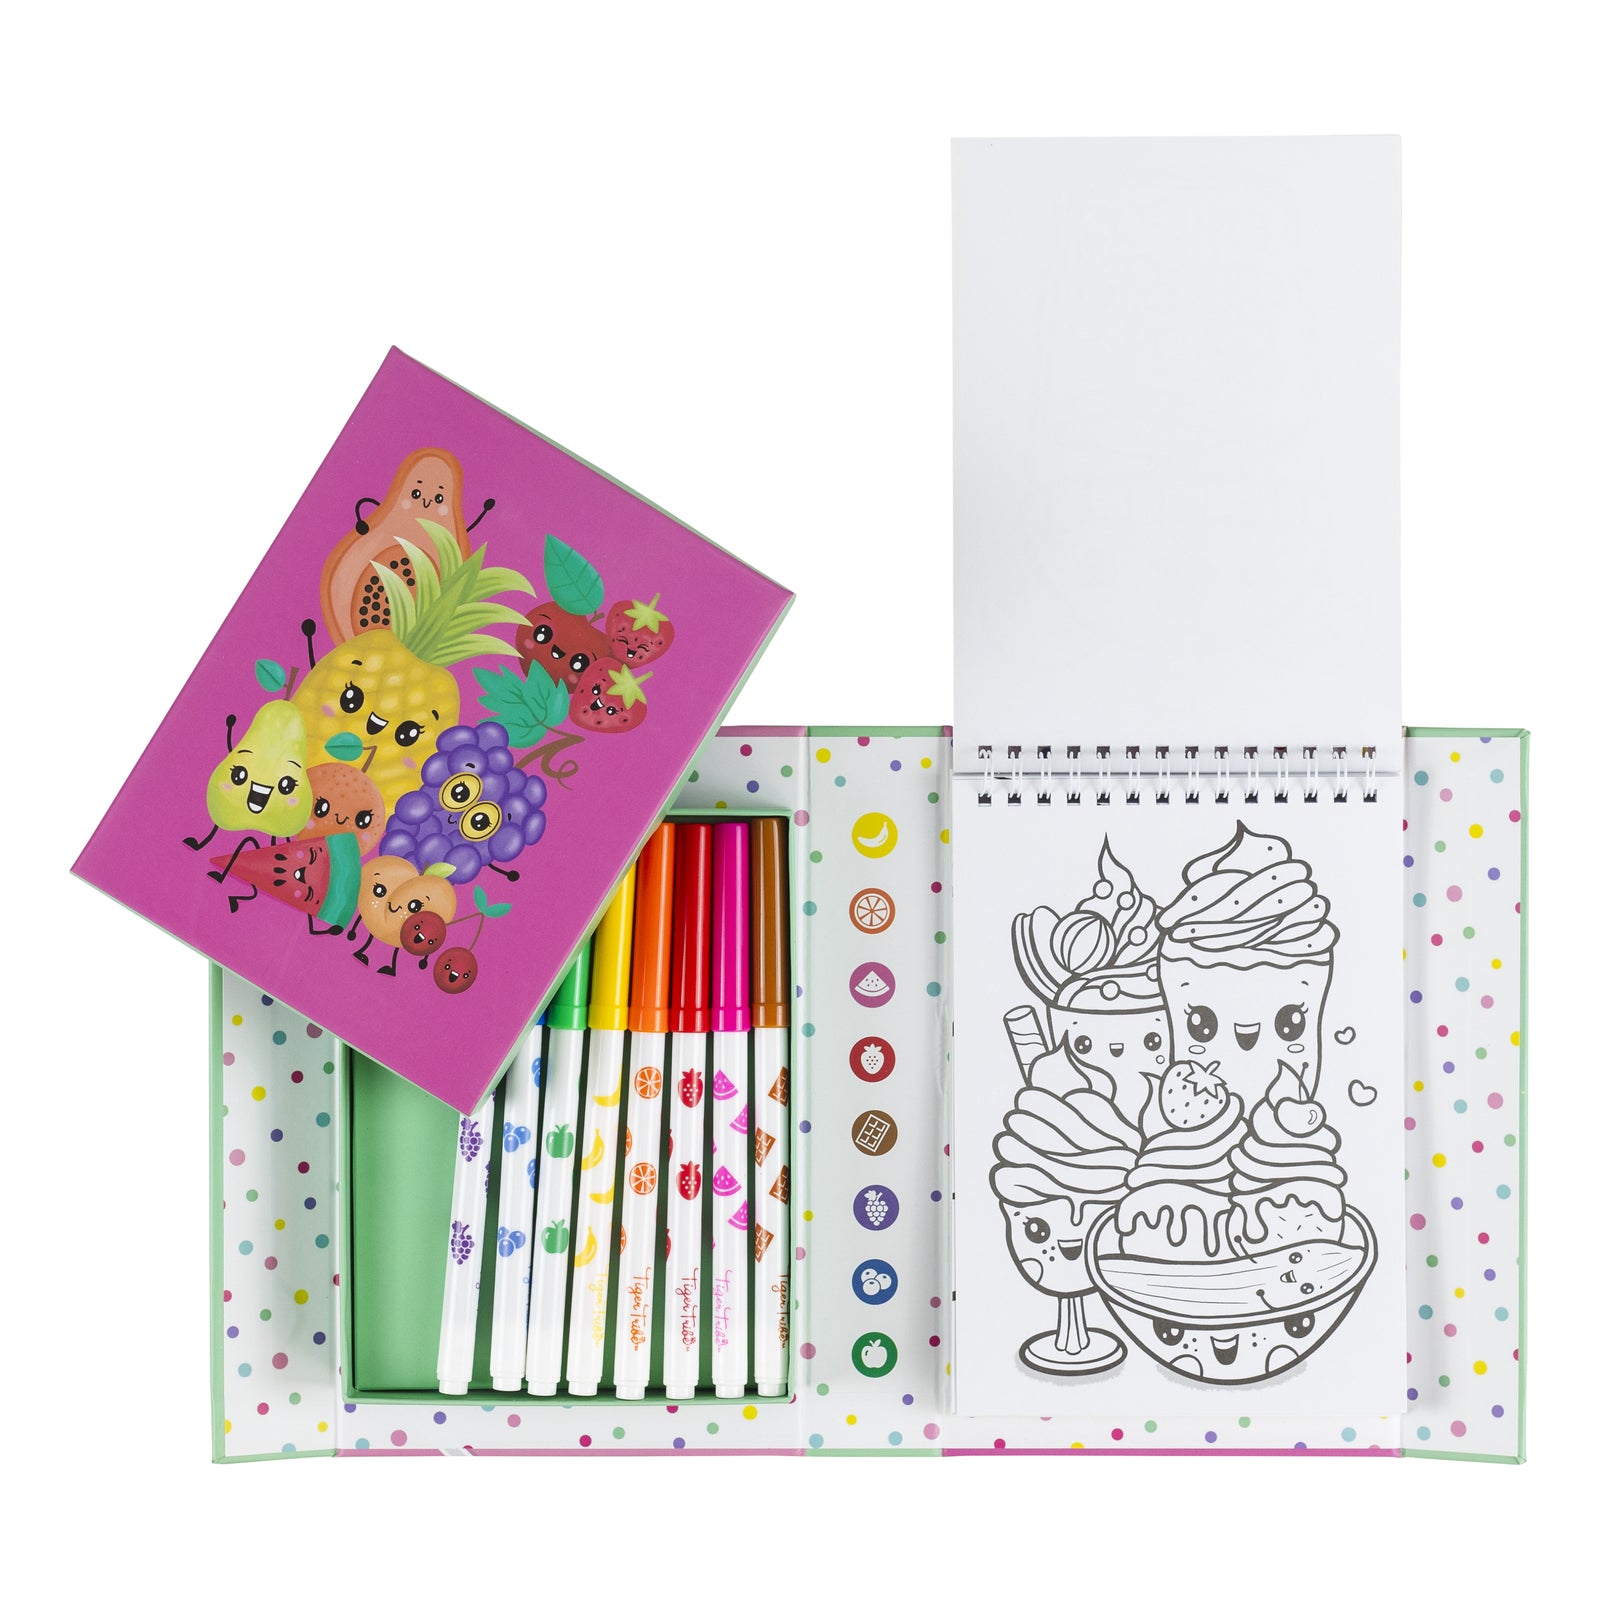 Tiger Tribe Scented Colouring Set - Fruity Cutie